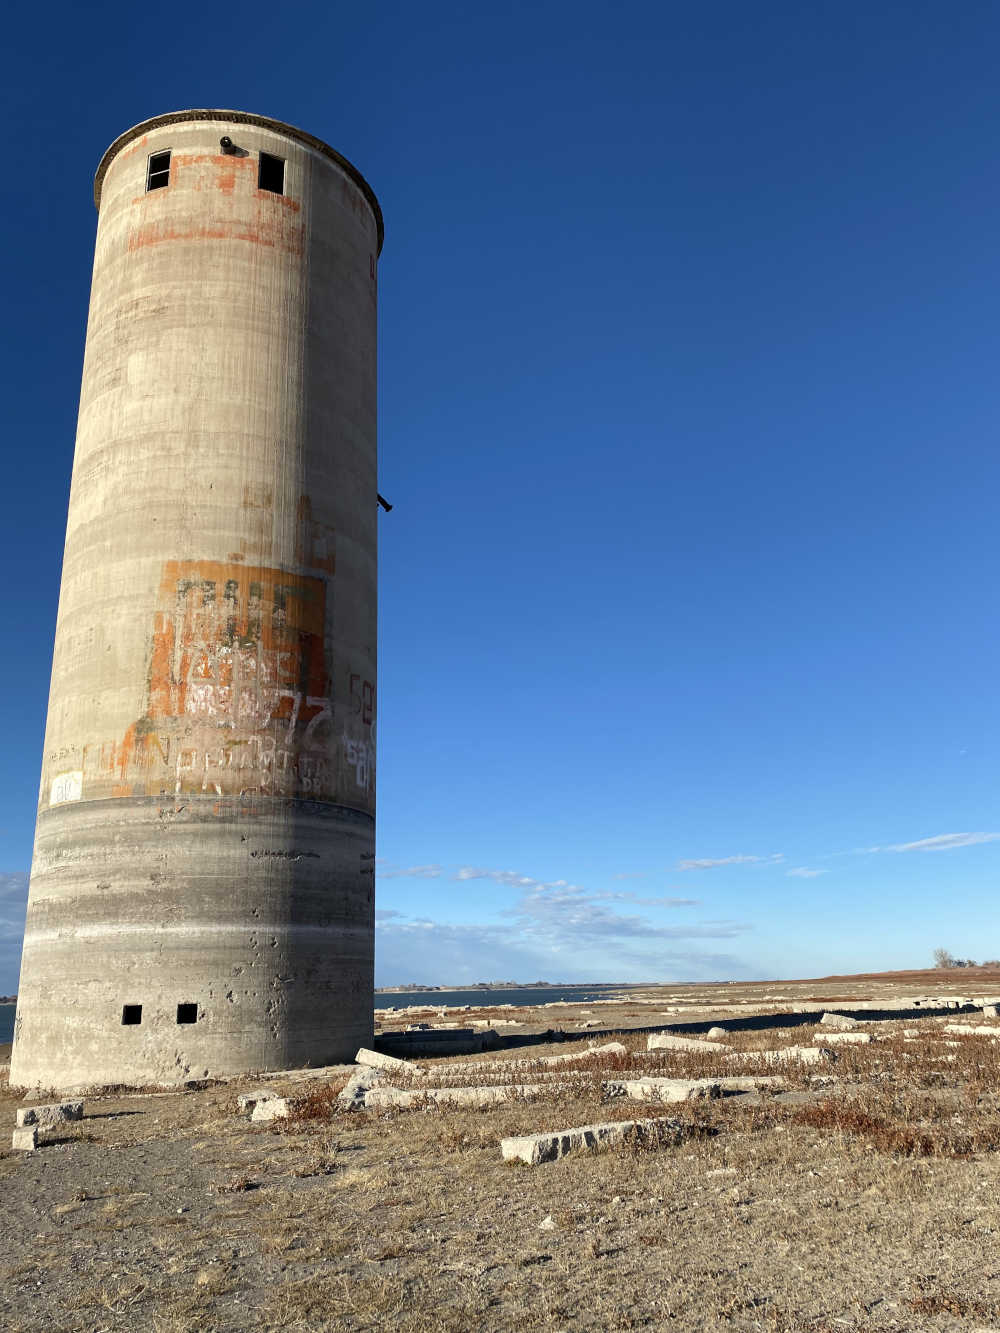 In a field, an abandoned grain silo sits to the left of some structural foundations.